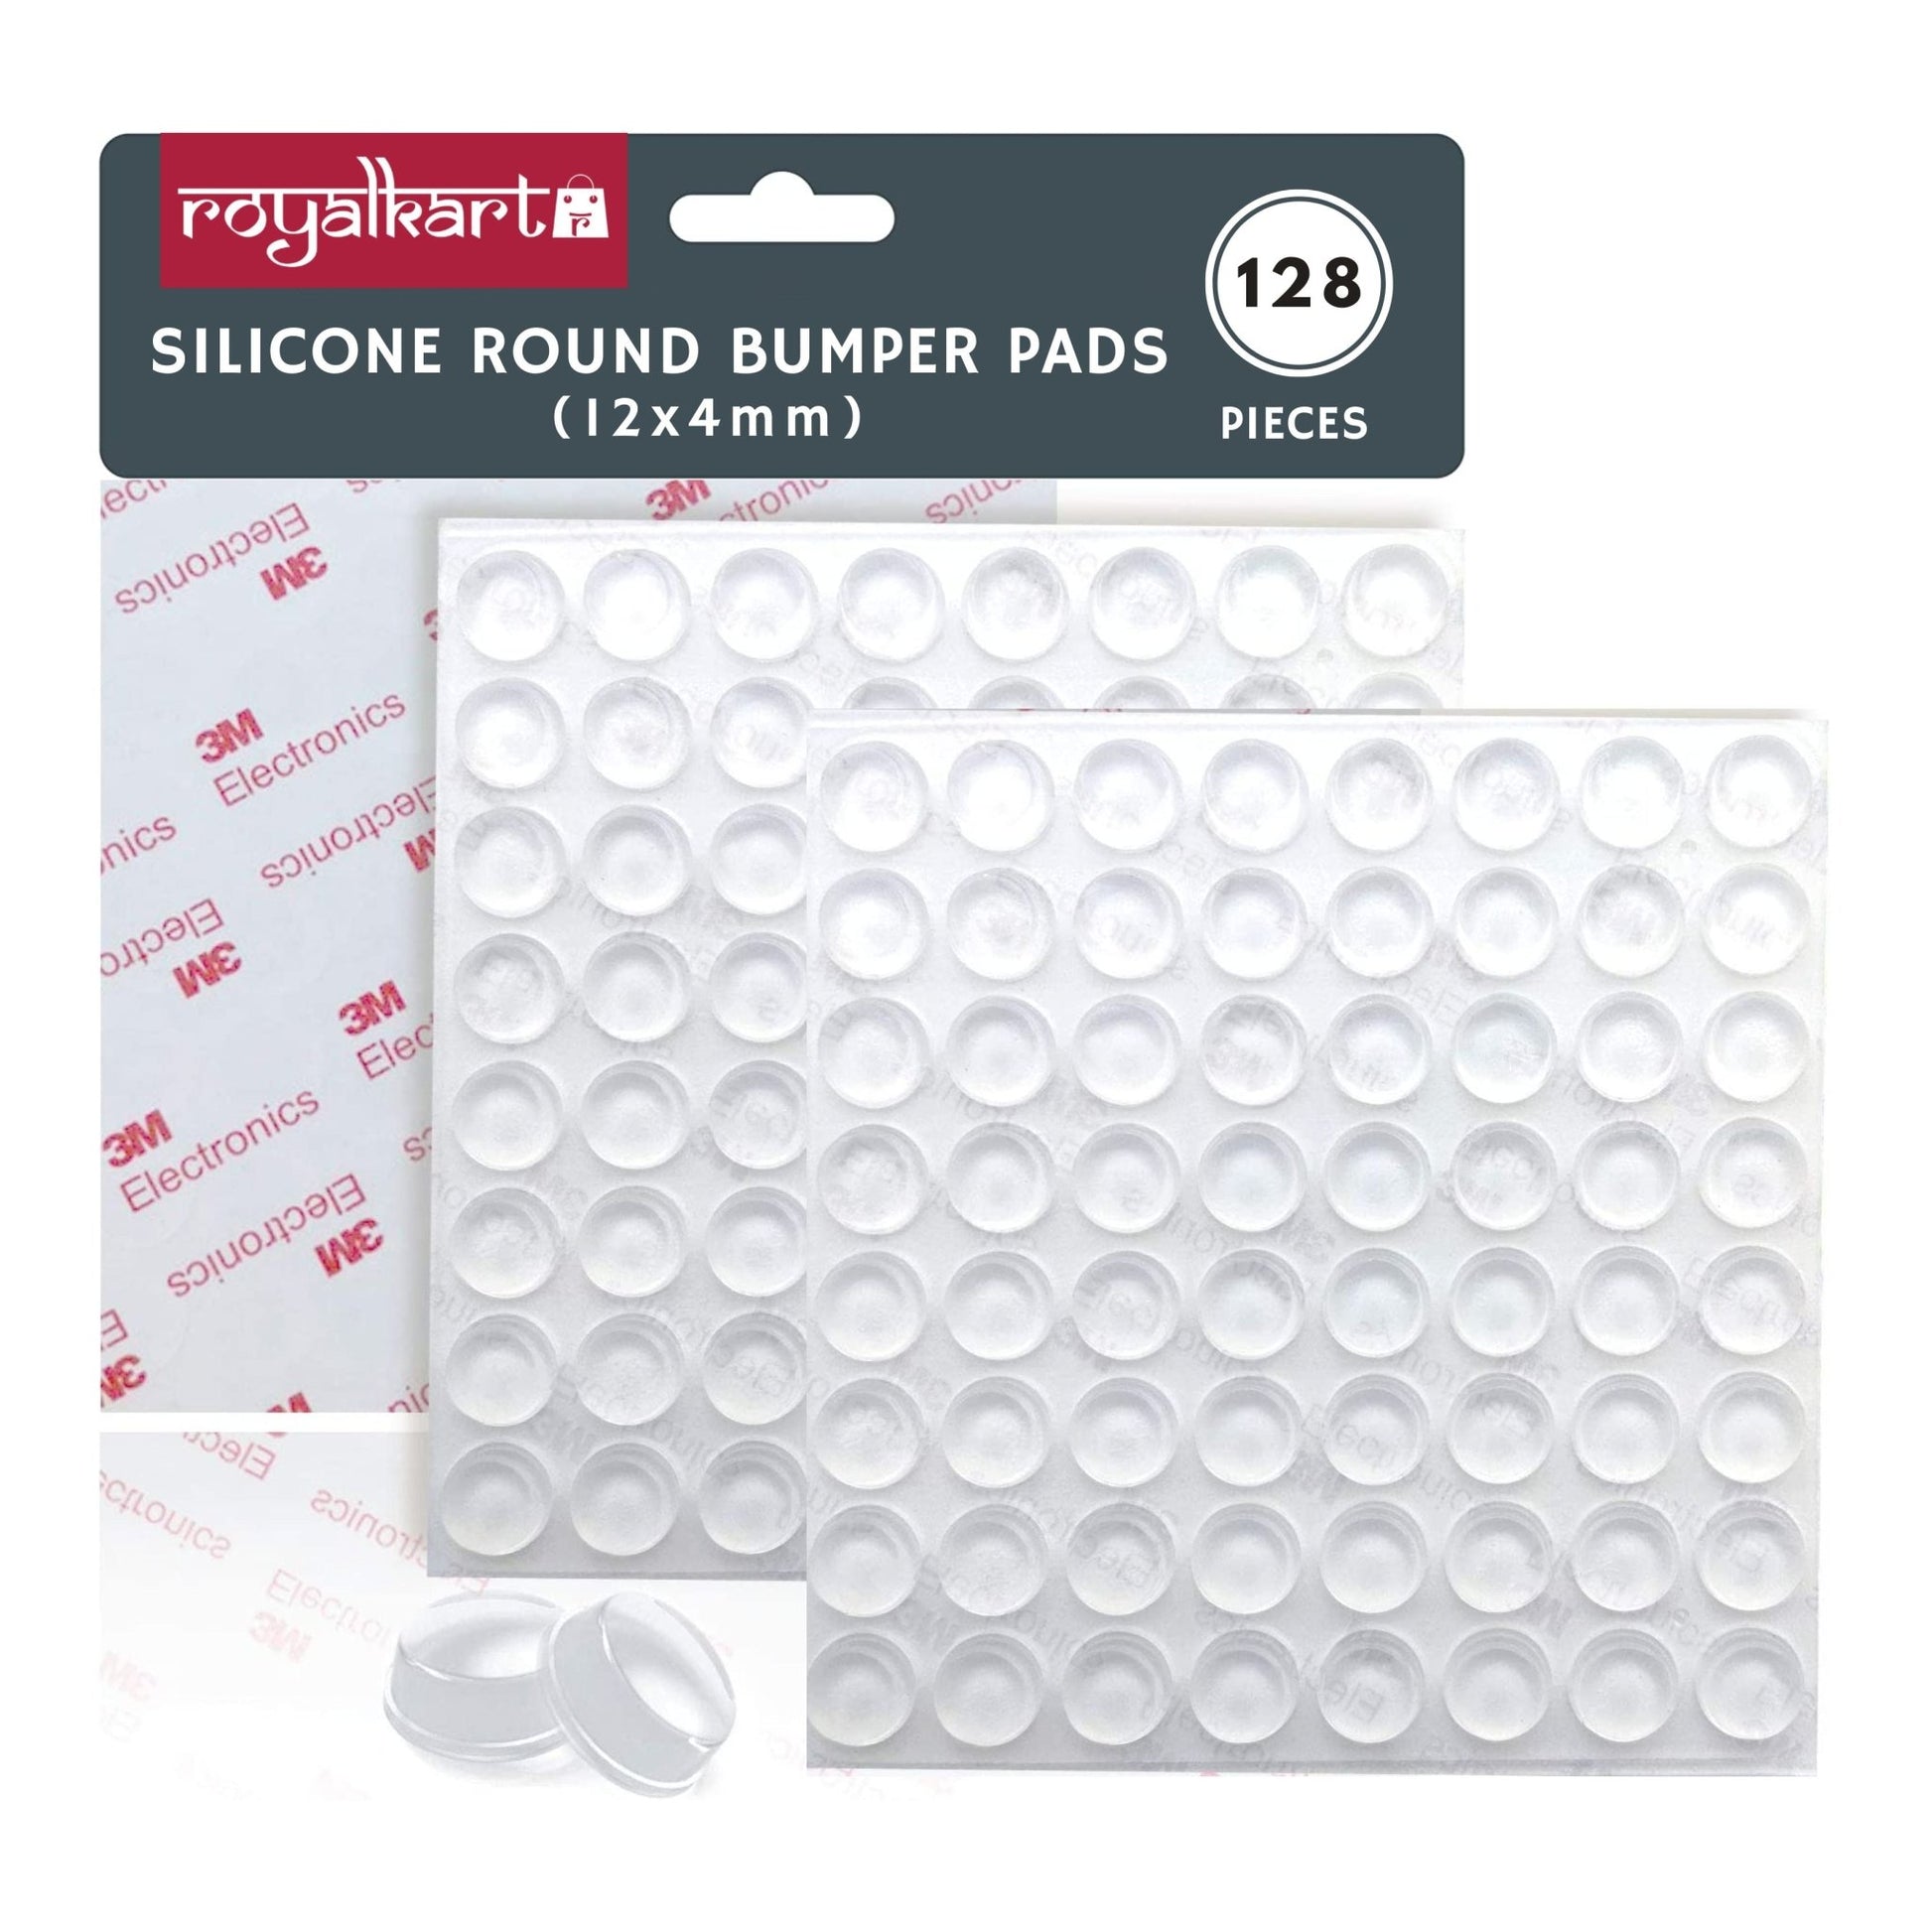 Silicone Bumper Pads For Furniture furniture pads- Royalkart - The Urban Store